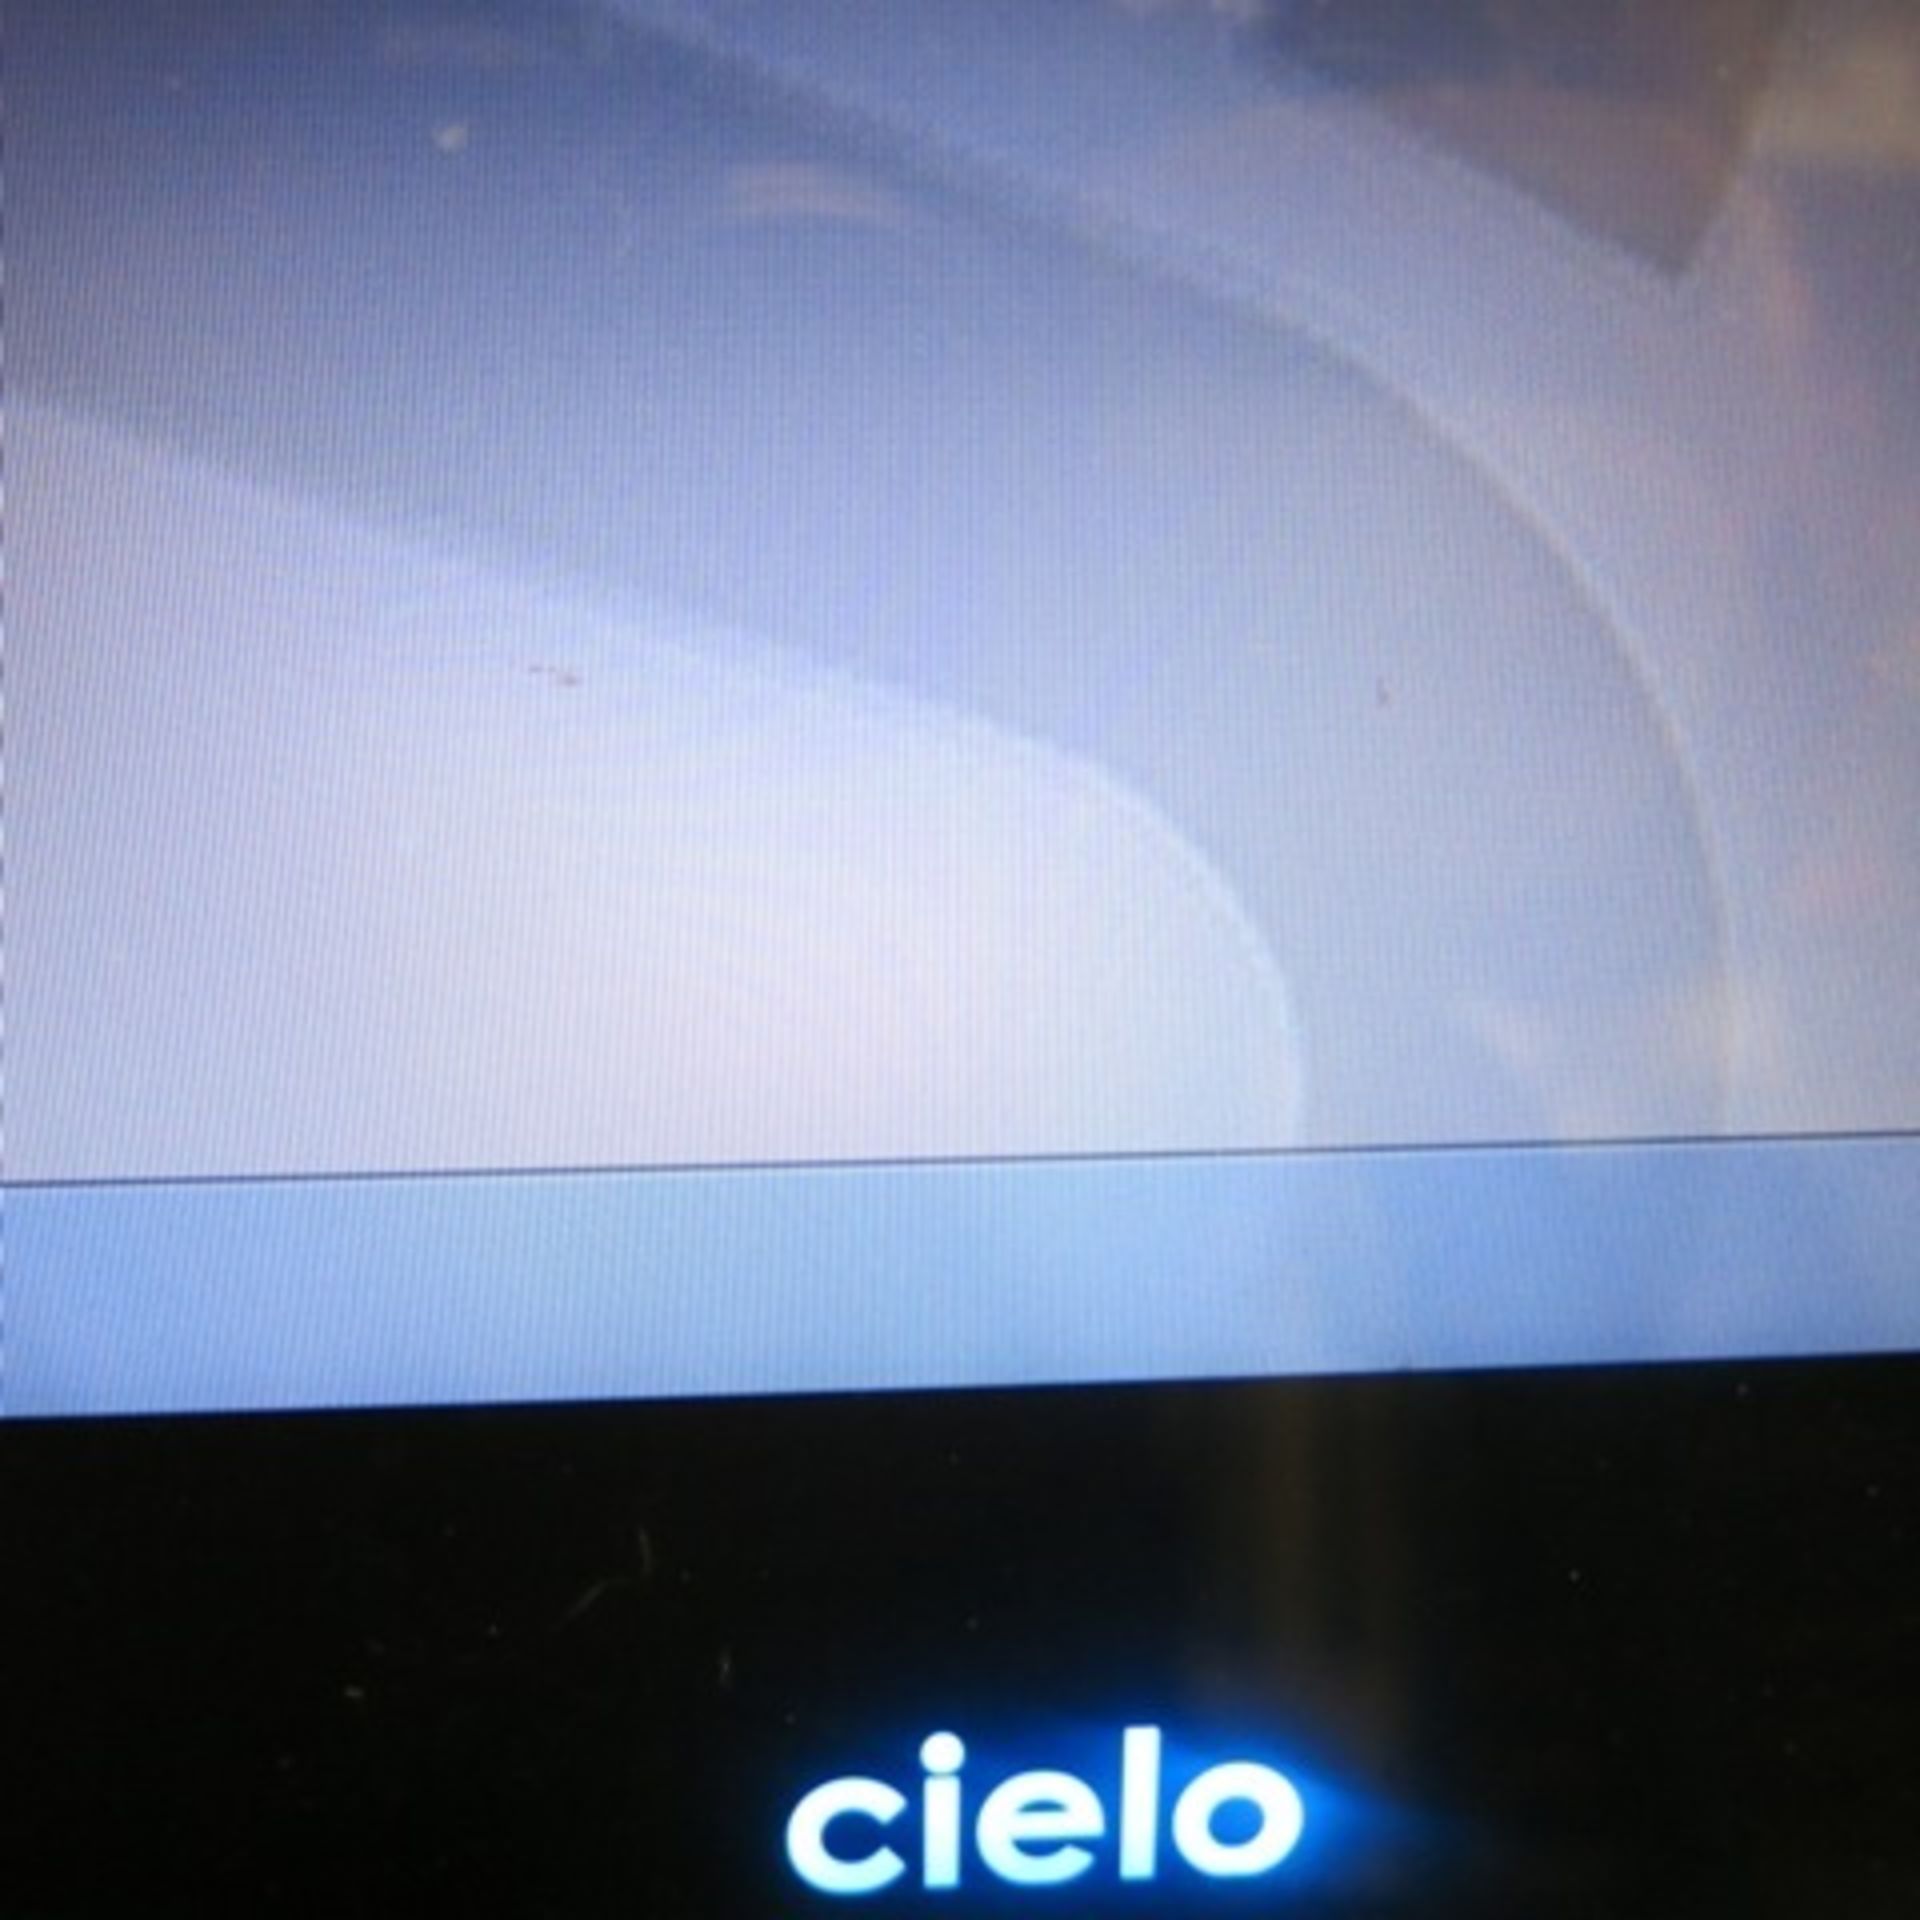 Epos System to Include: 2 x Cielo PX150 Panel PC Touch Screen Displays, Windows Embedded Standard. - Bild 3 aus 9